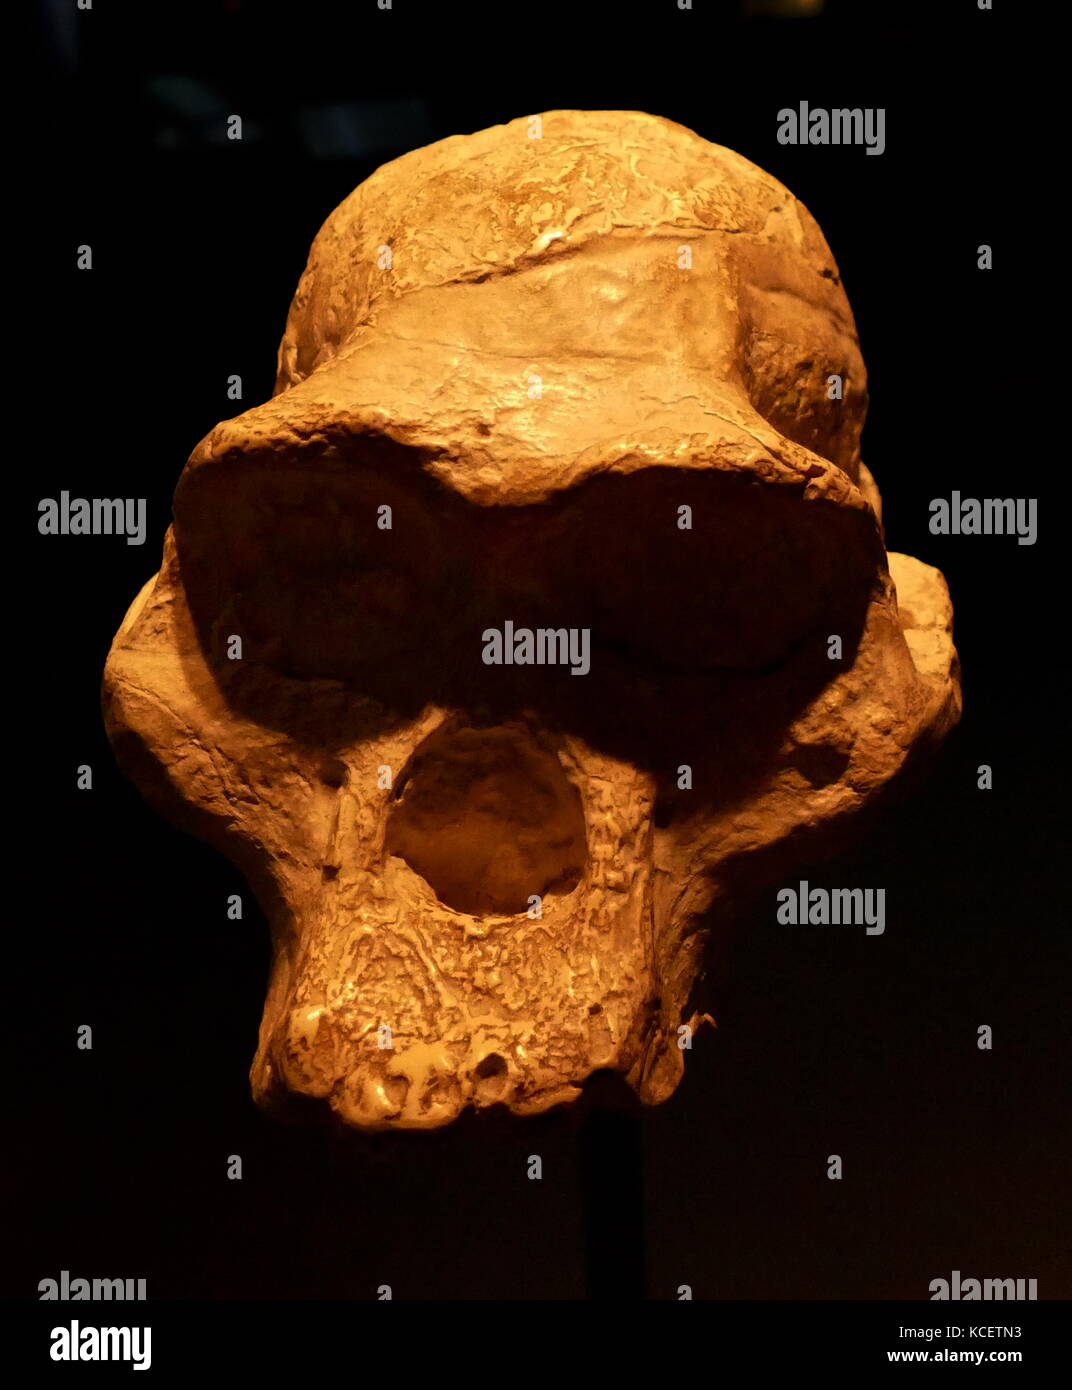 Australopithecus Africanus, an extinct (fossil) species of the australopithecines, the first of an early ape-form species to be classified as hominin (in 1924). dated as living between 3.3 and 2.1 million years ago, or in the late Pliocene and early Pleistocene times; it is debated as being a direct ancestor of modern humans. This skull was found at Taung, South Africa Stock Photo